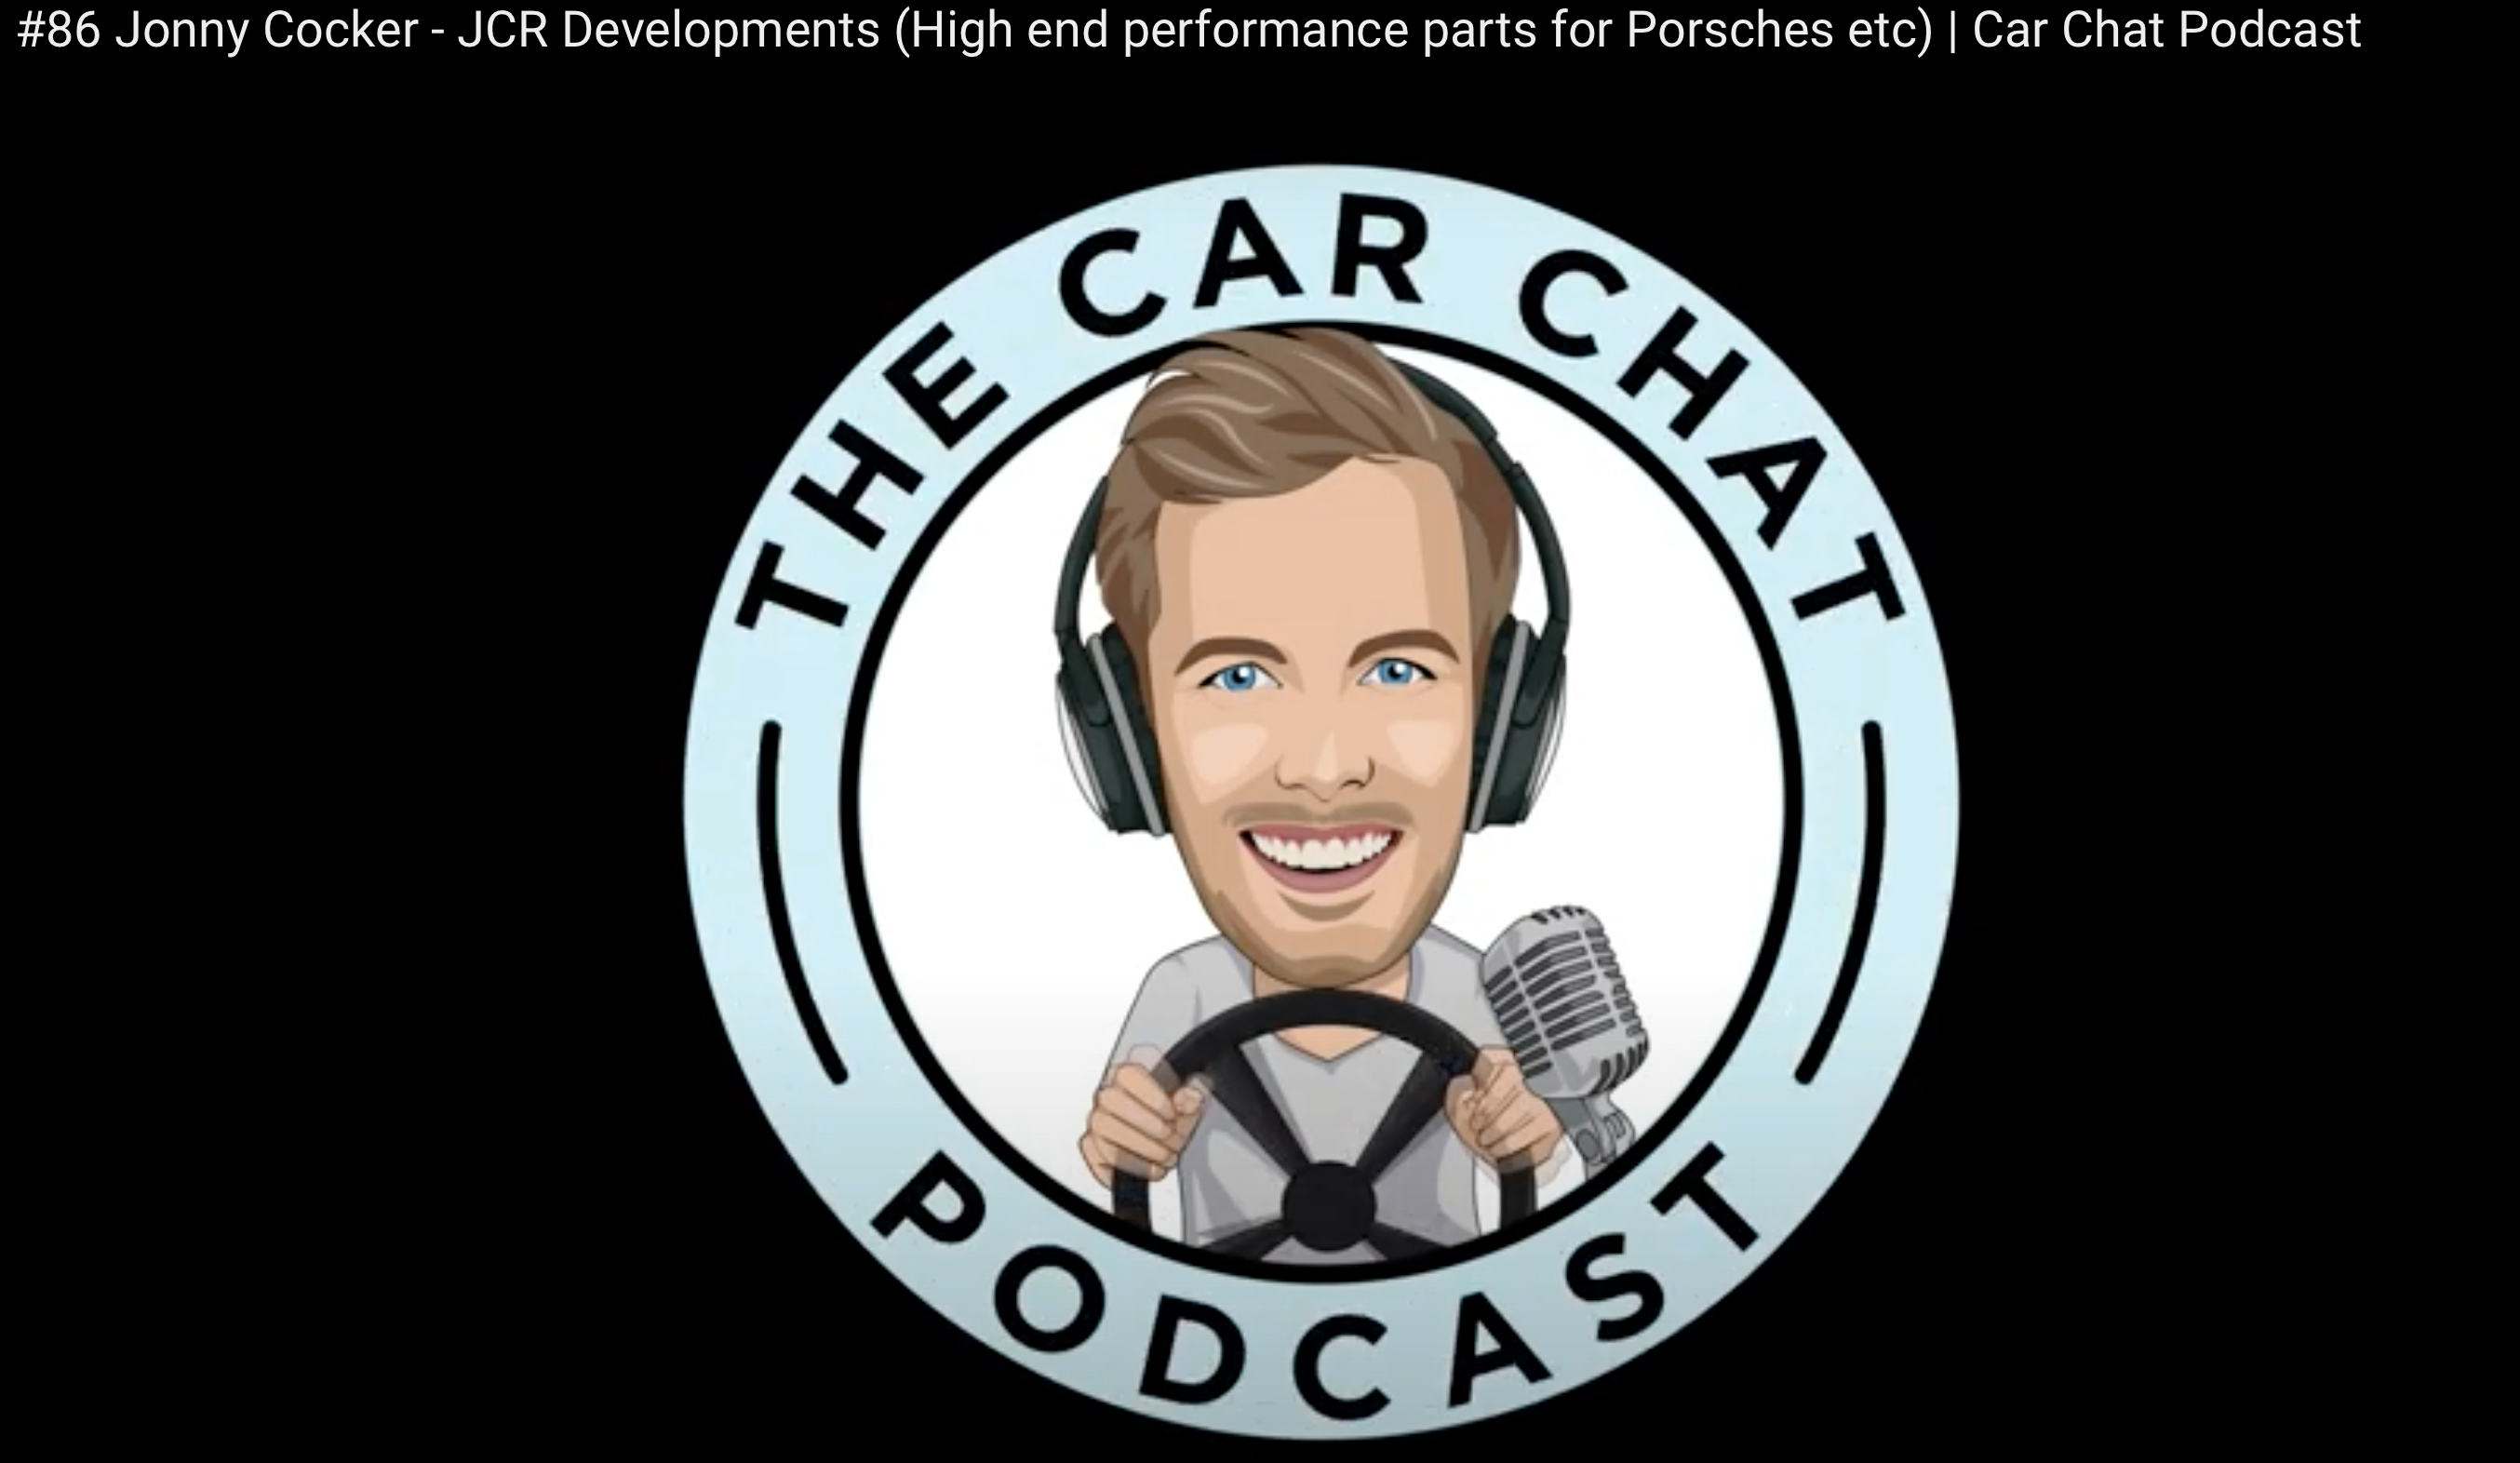 CAR CHAT PODCAST